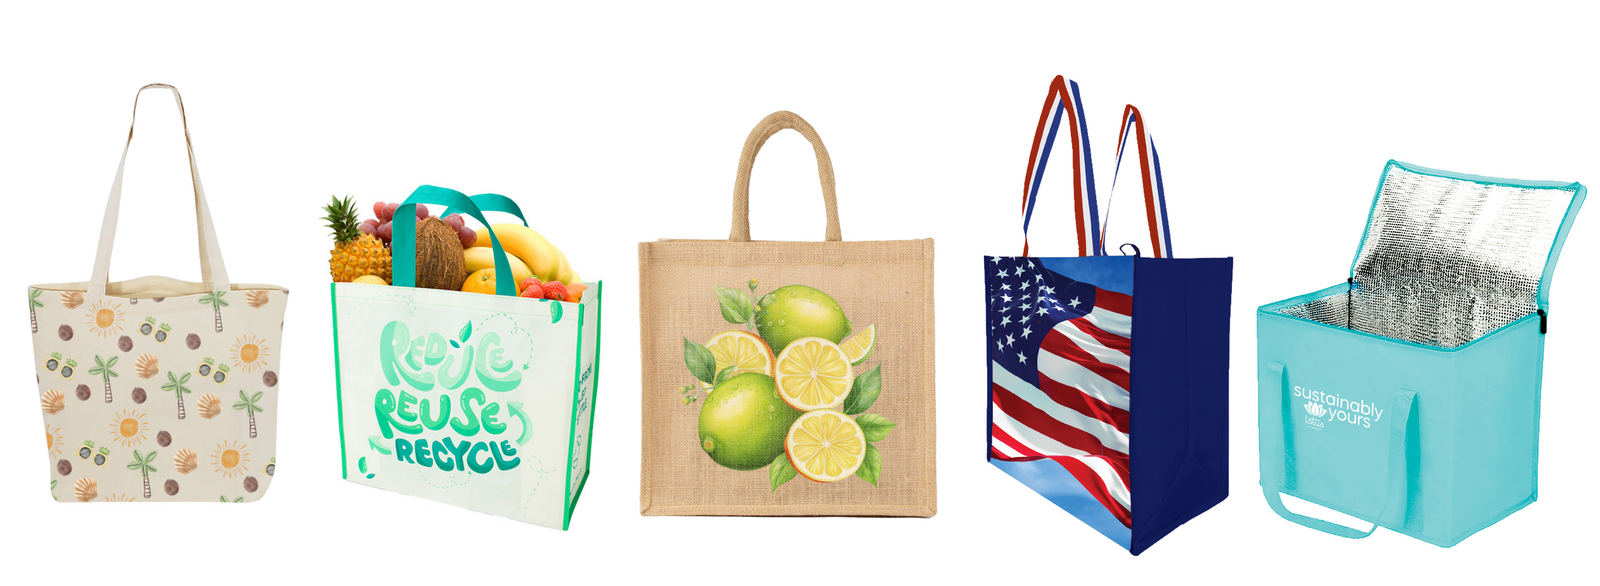 Ollily Mesh Tote Bag, Reusable Grocery Bags Farmers Market India | Ubuy